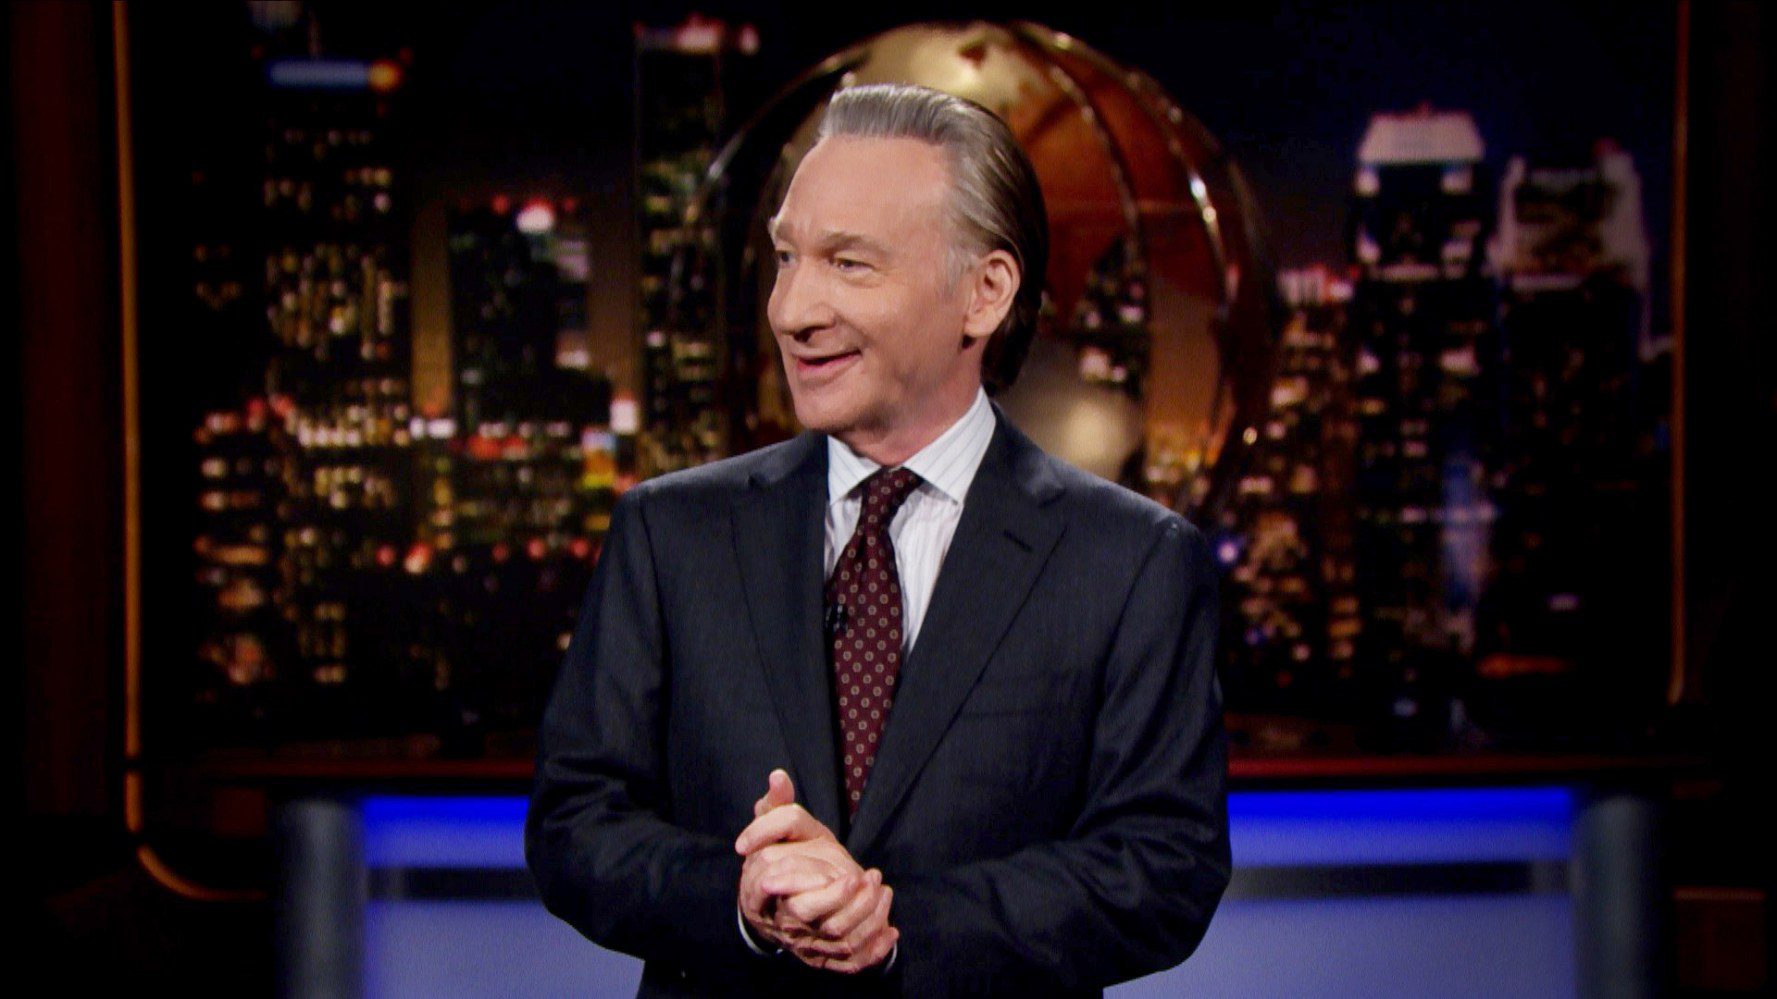 Bill Maher Puts Dr. Phil On The Couch And Asks Him To Explain Himself